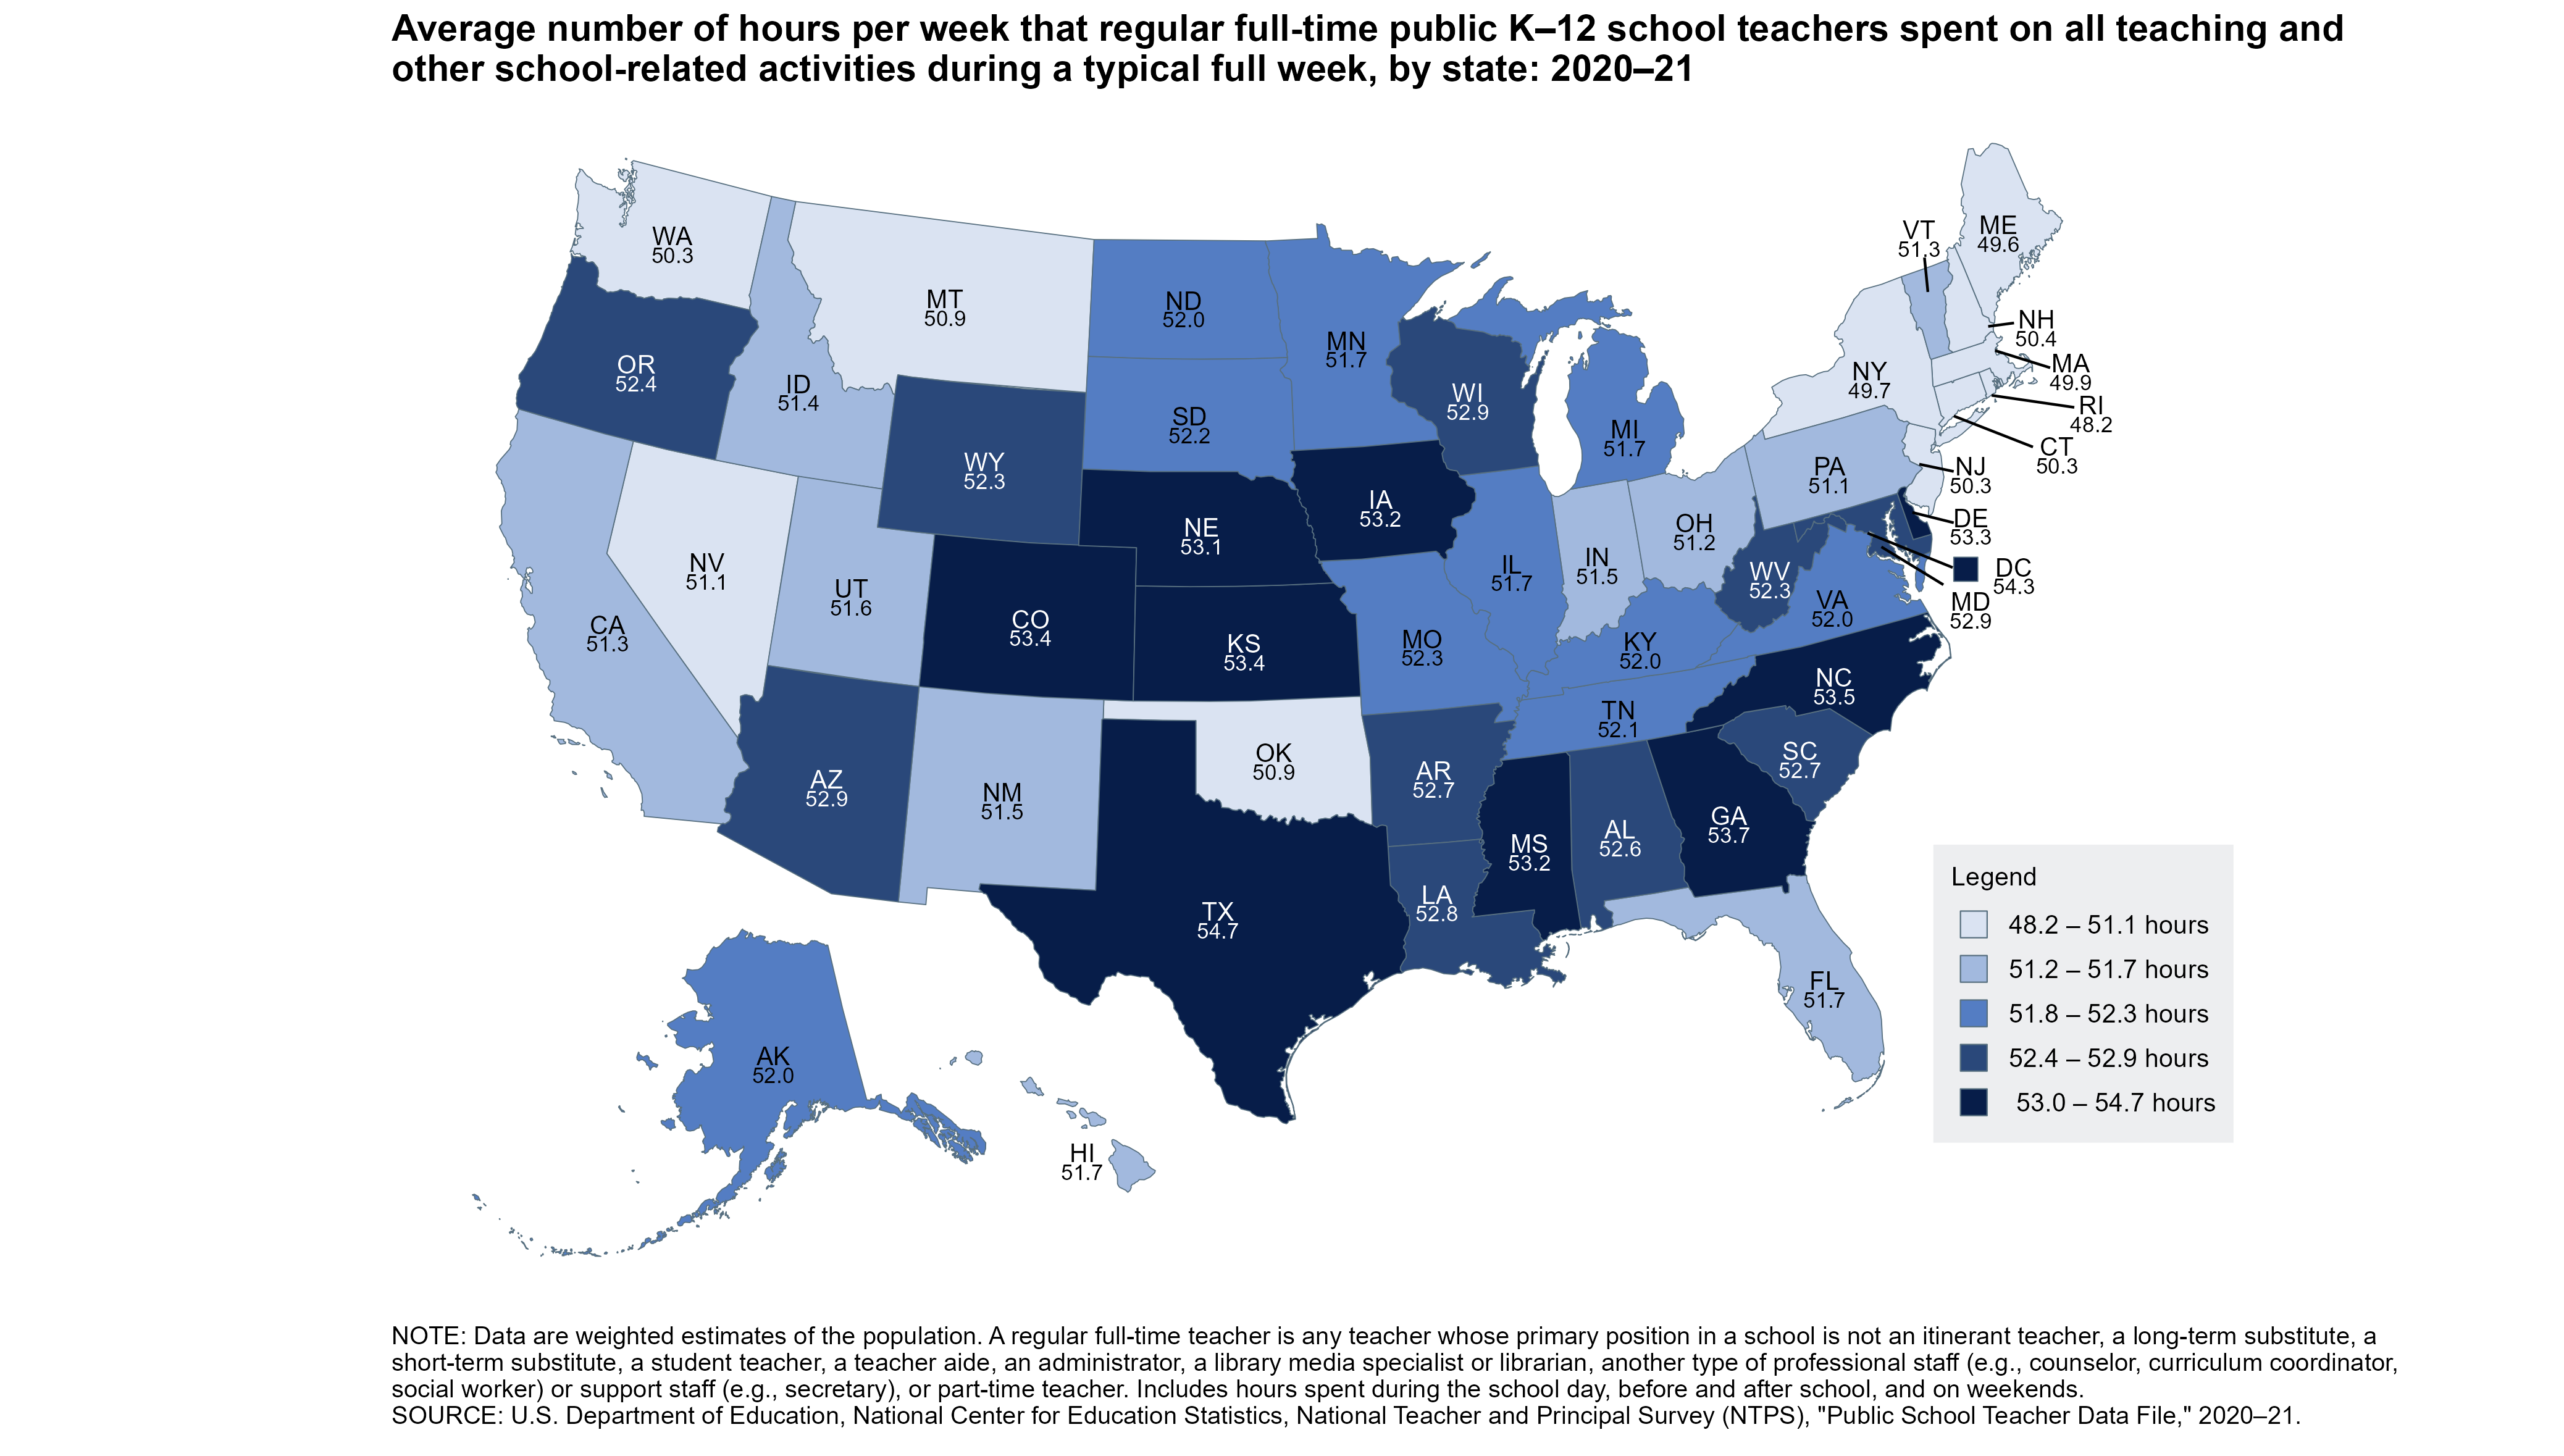 Average number of hours per week that regular full-time public K-12 school teachers spent on all teaching and other school-related activities during a typical full week, by state: 2020-21